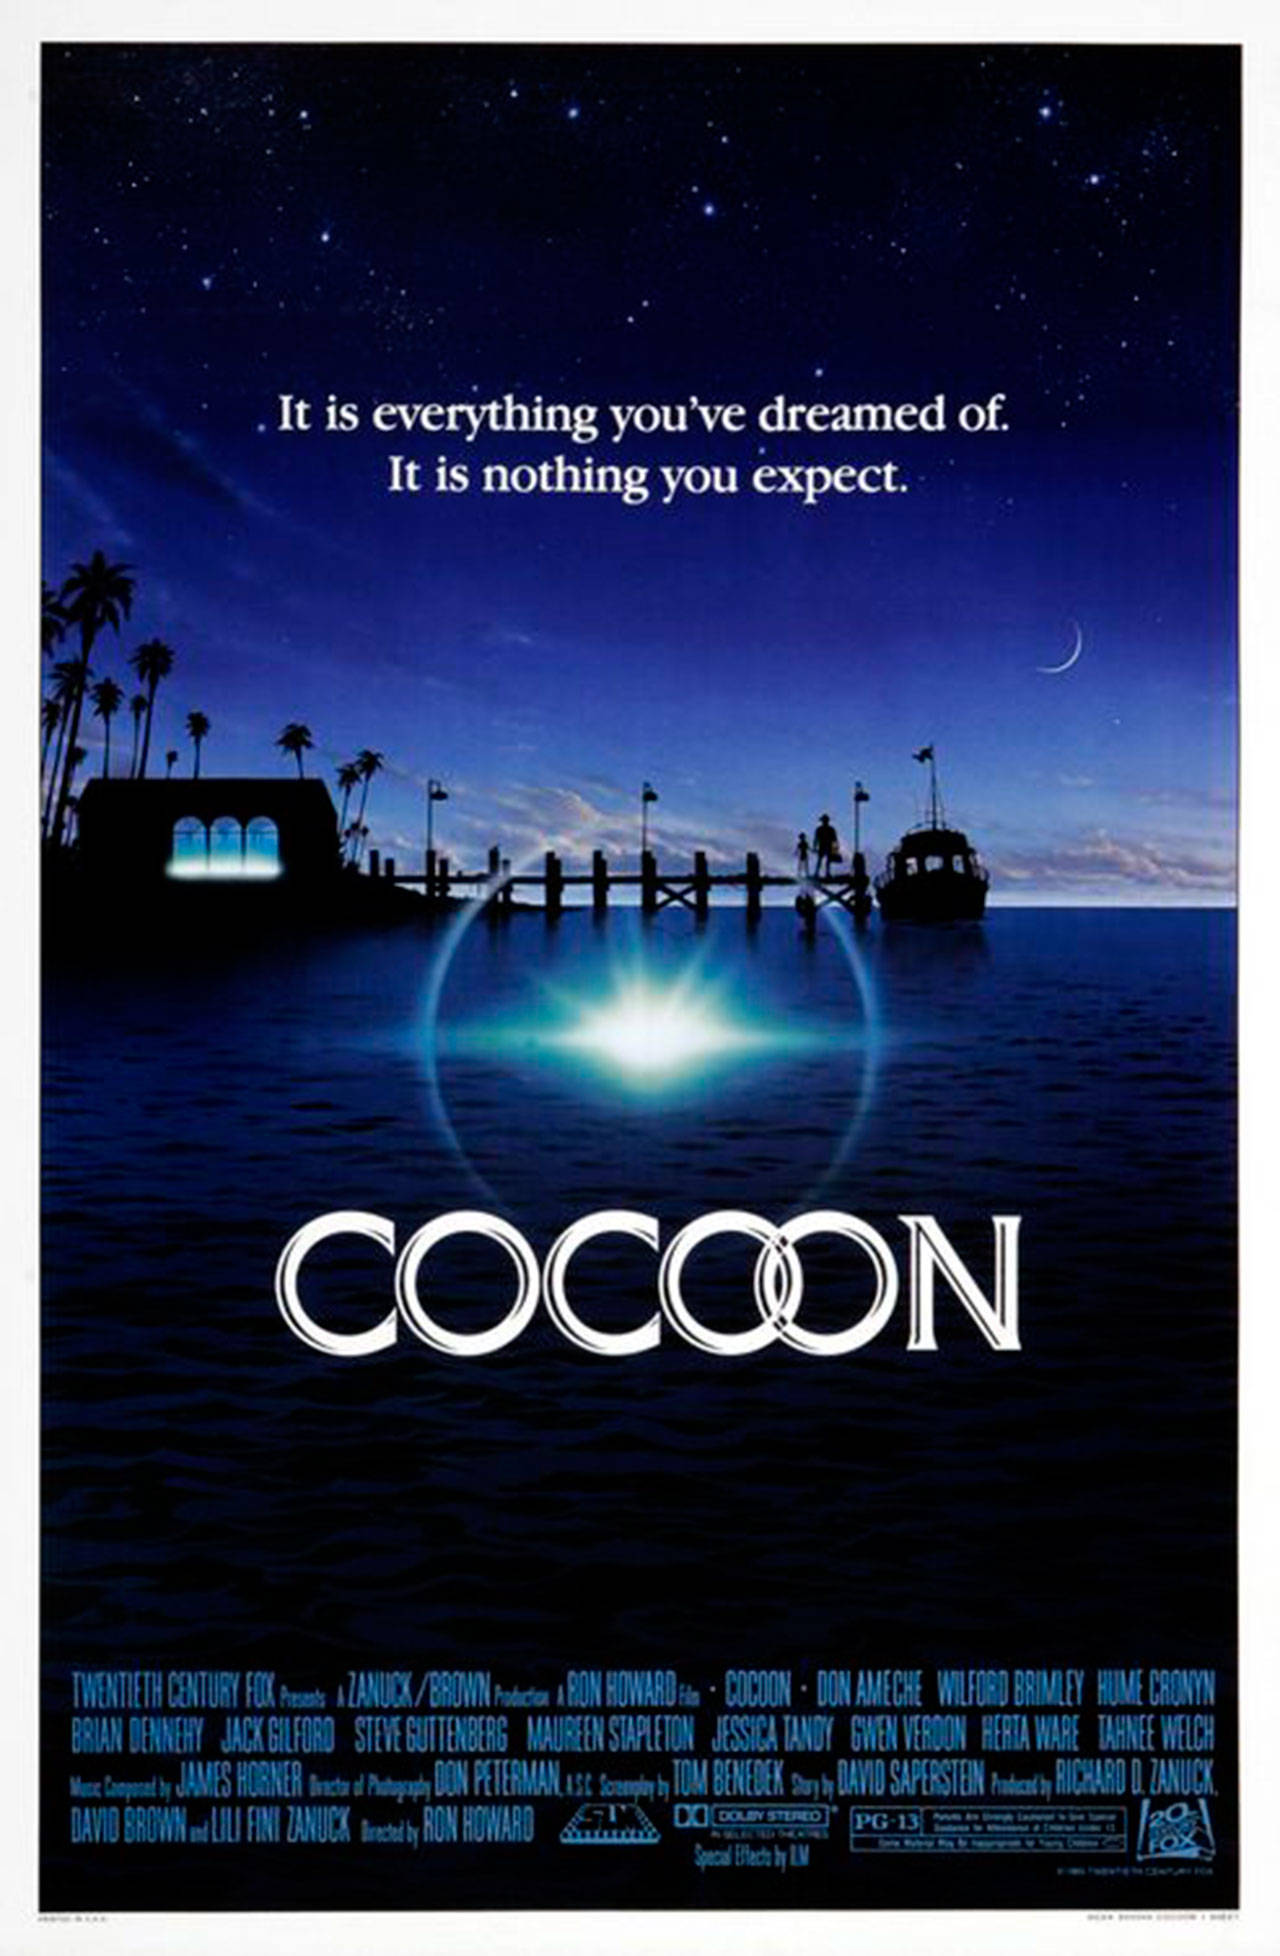 Image courtesy of 20th Century Fox                                 The second annual Island Volunteer Caregivers Senior Film Series, “The Art (and Science) of Aging” will continue with a screening of “Cocoon” at 1 p.m. Sunday, April 30 at the Bainbridge Island Museum of Art.